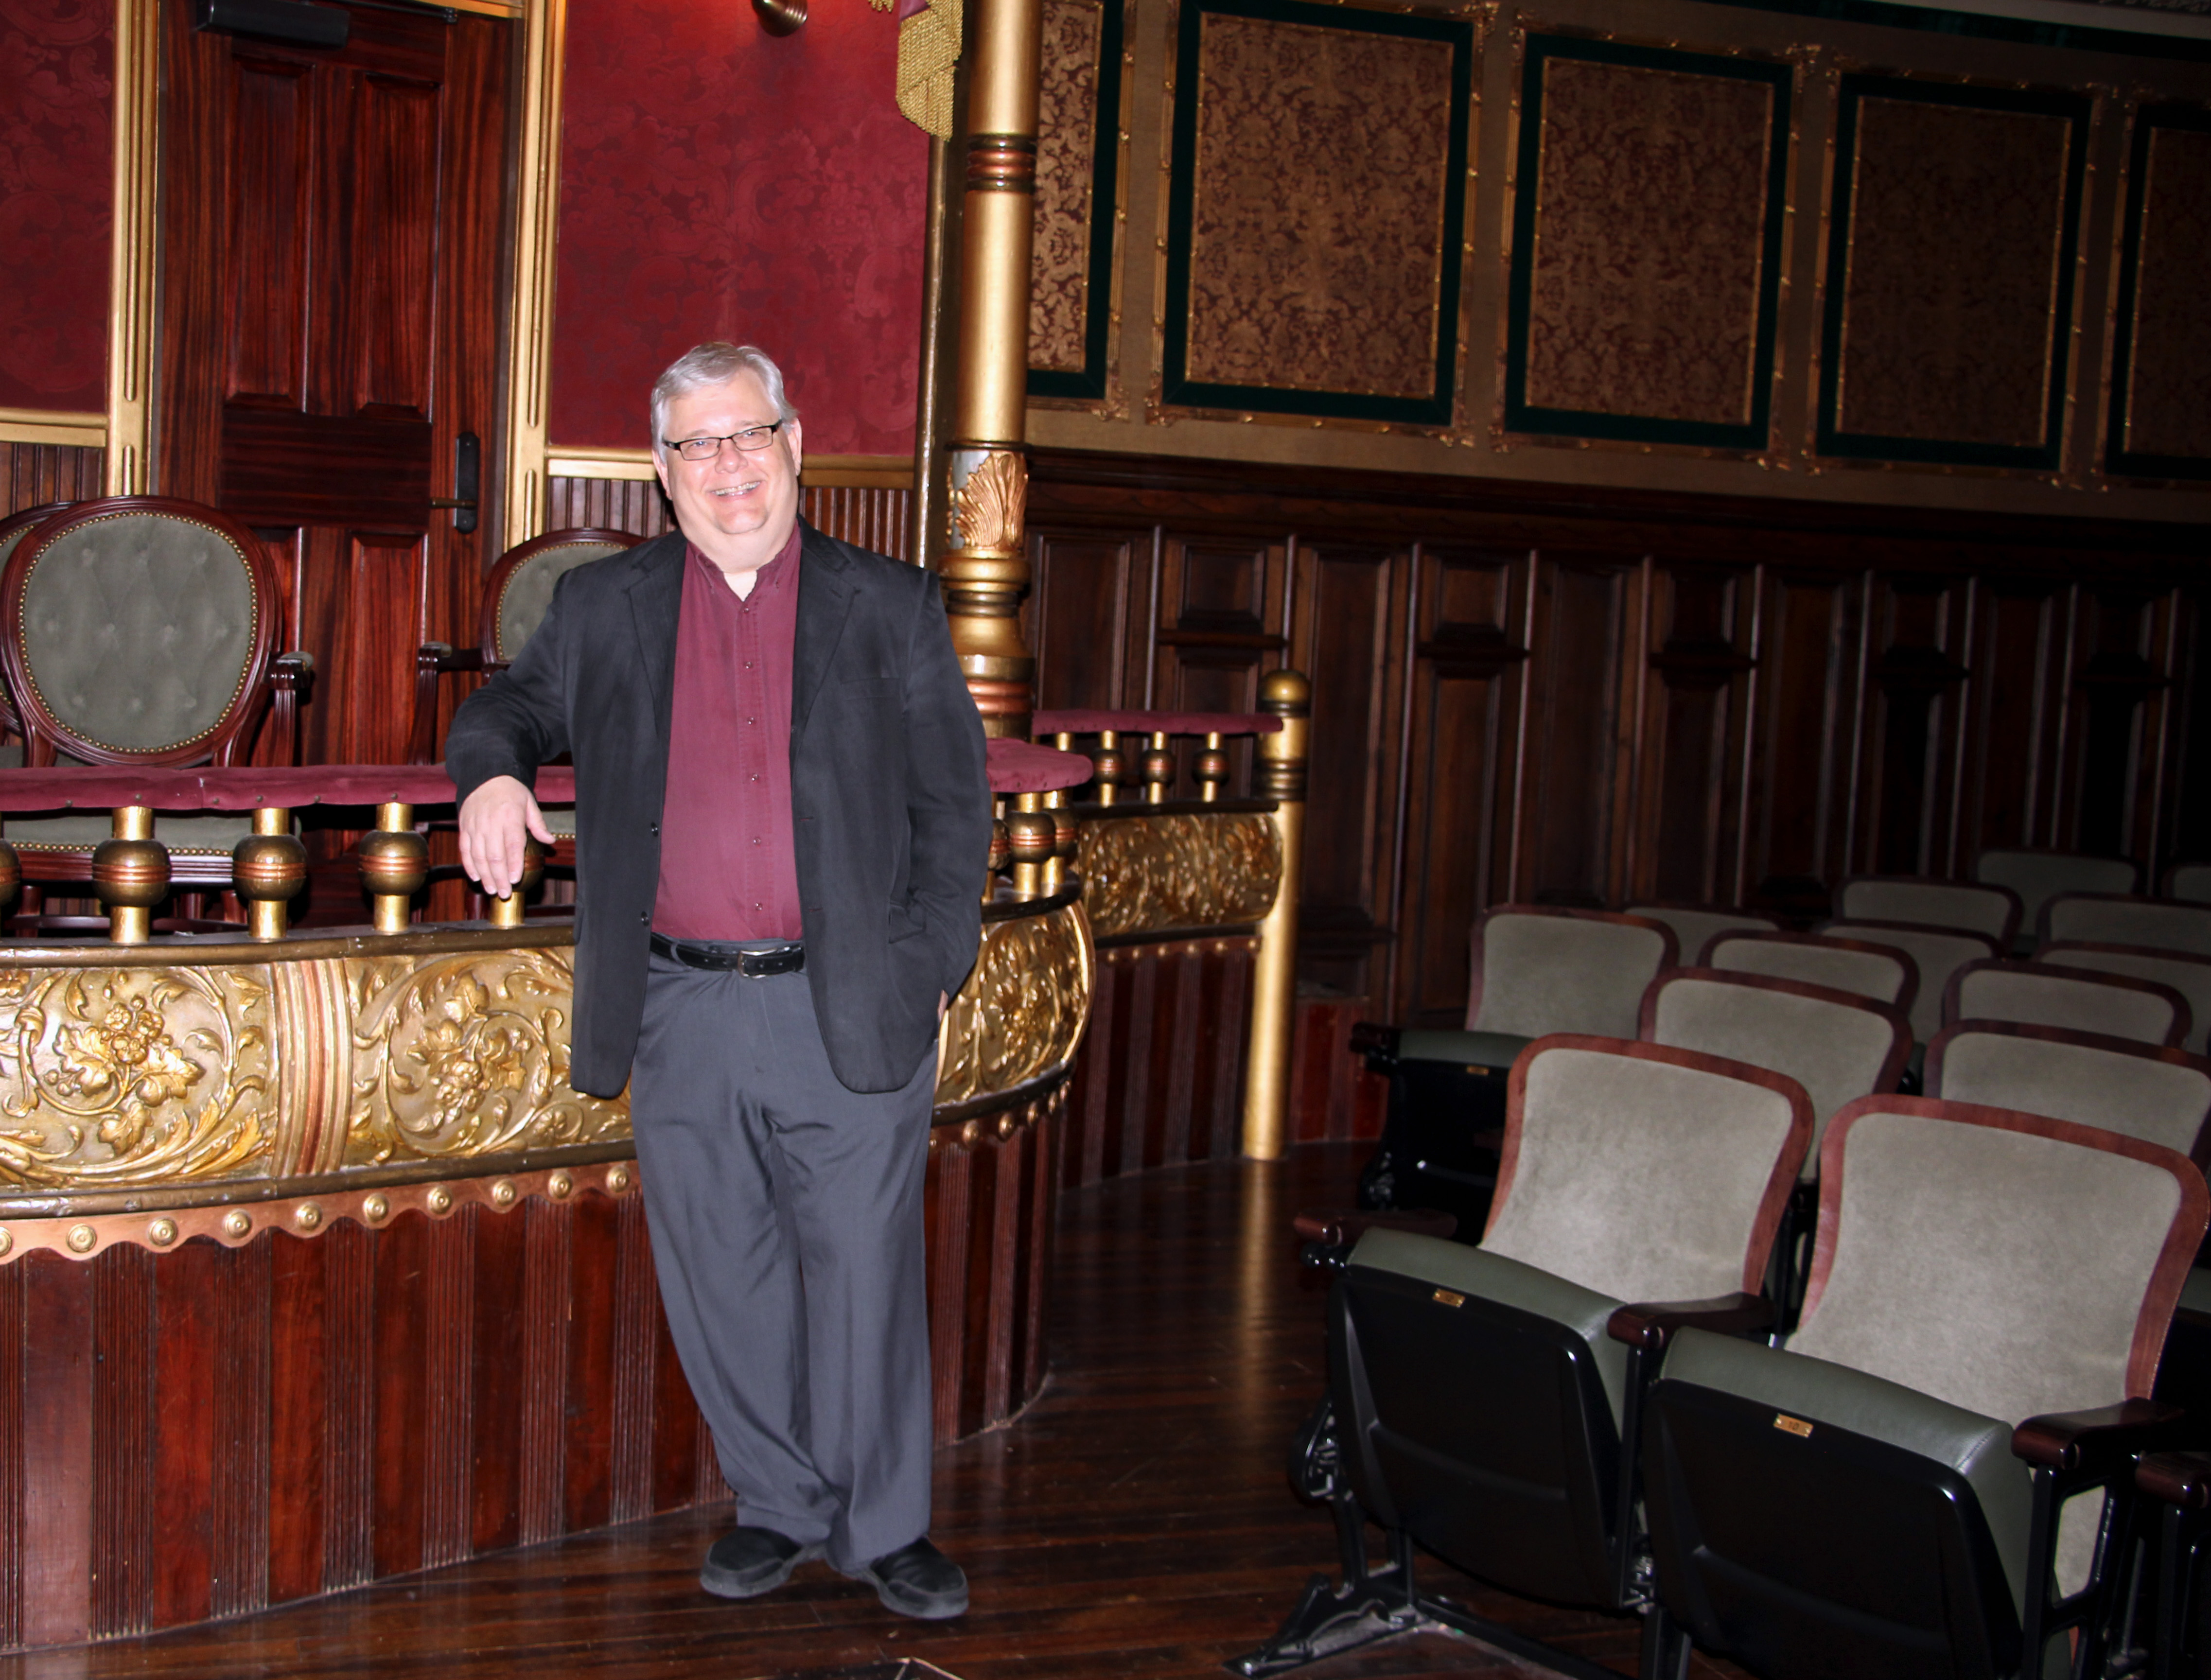 Dennis Sankovich stands in the restored grand opera house which became the home of the MSU Riley Center in 2006 